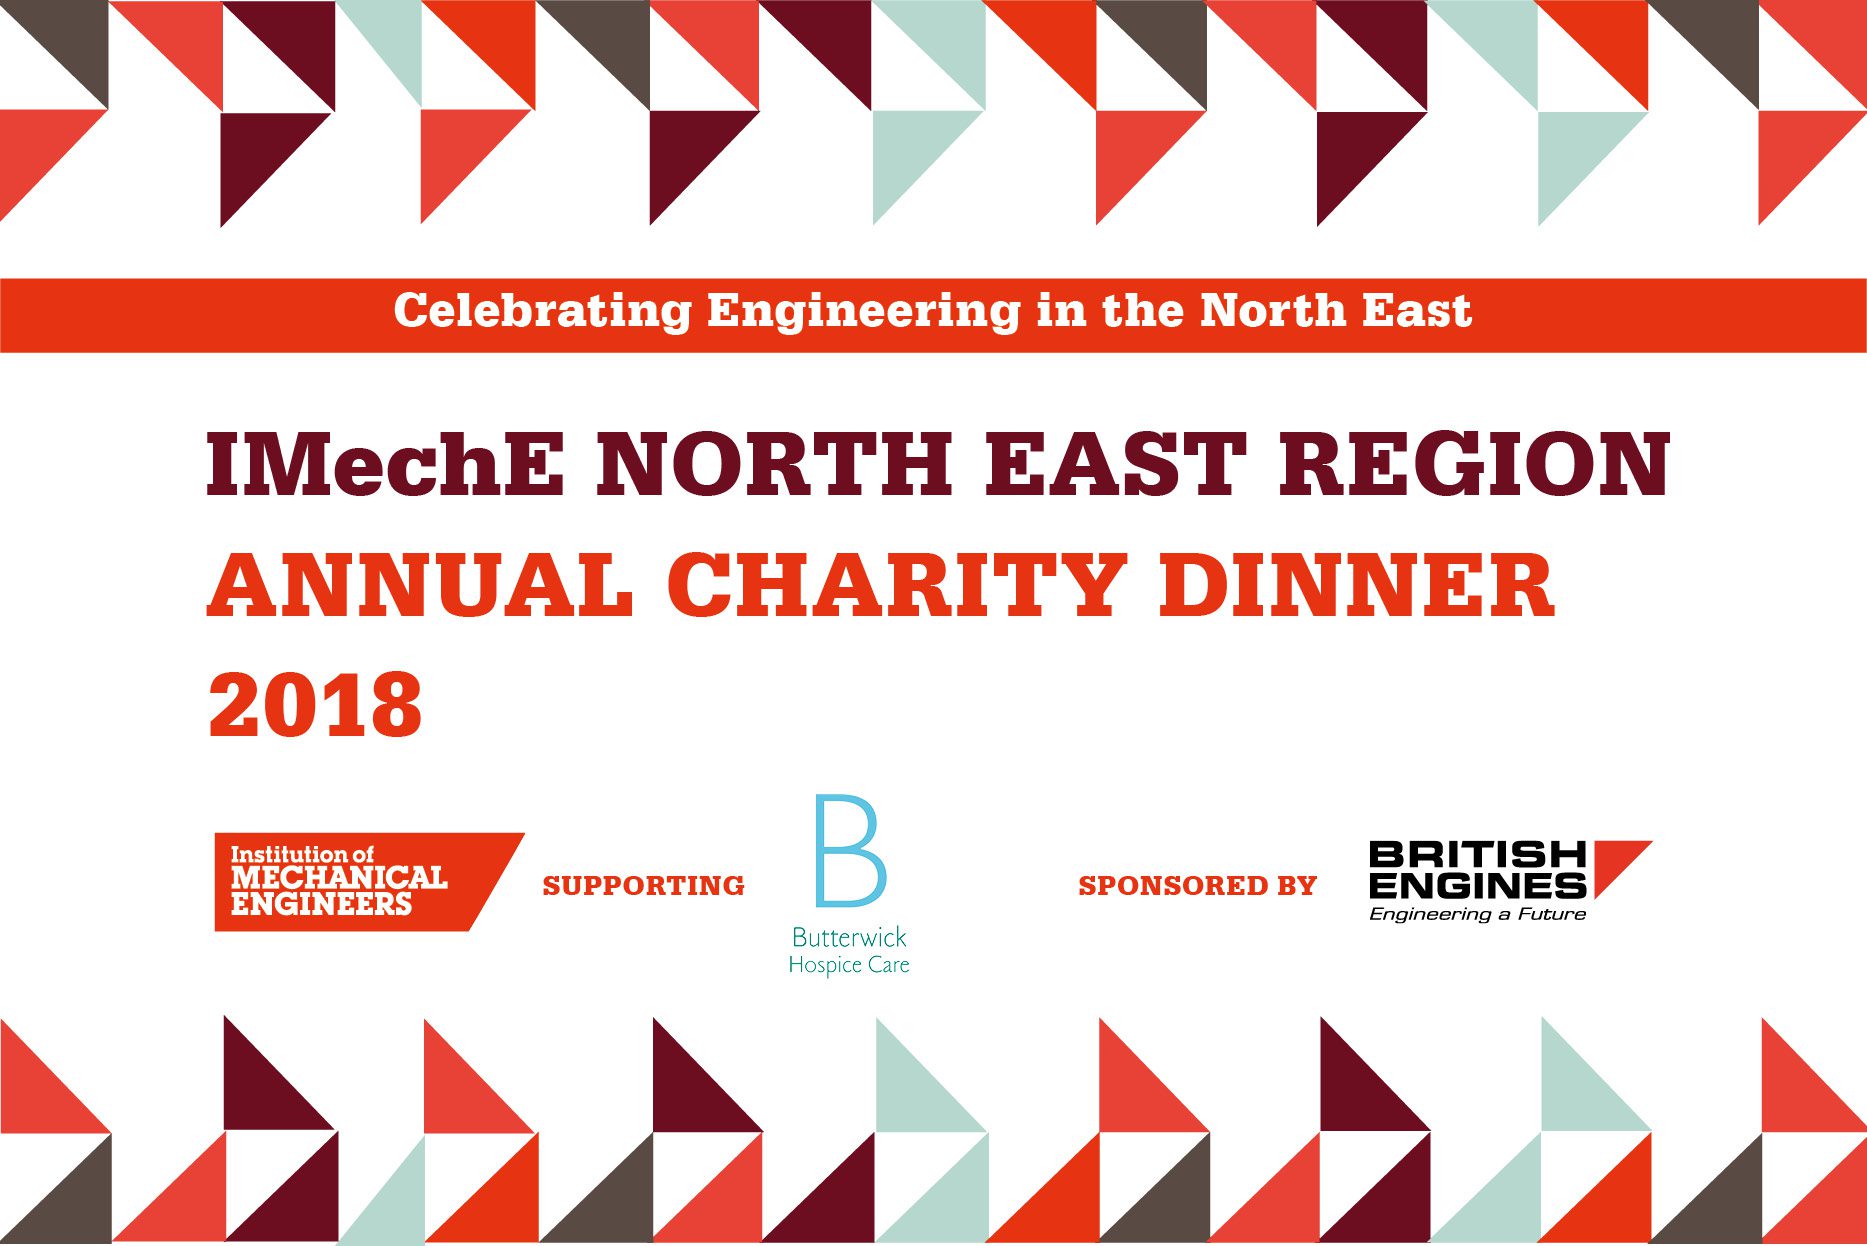 British Engines Sponsor the Institution of Mechanical Engineers North East Annual Charity Dinner